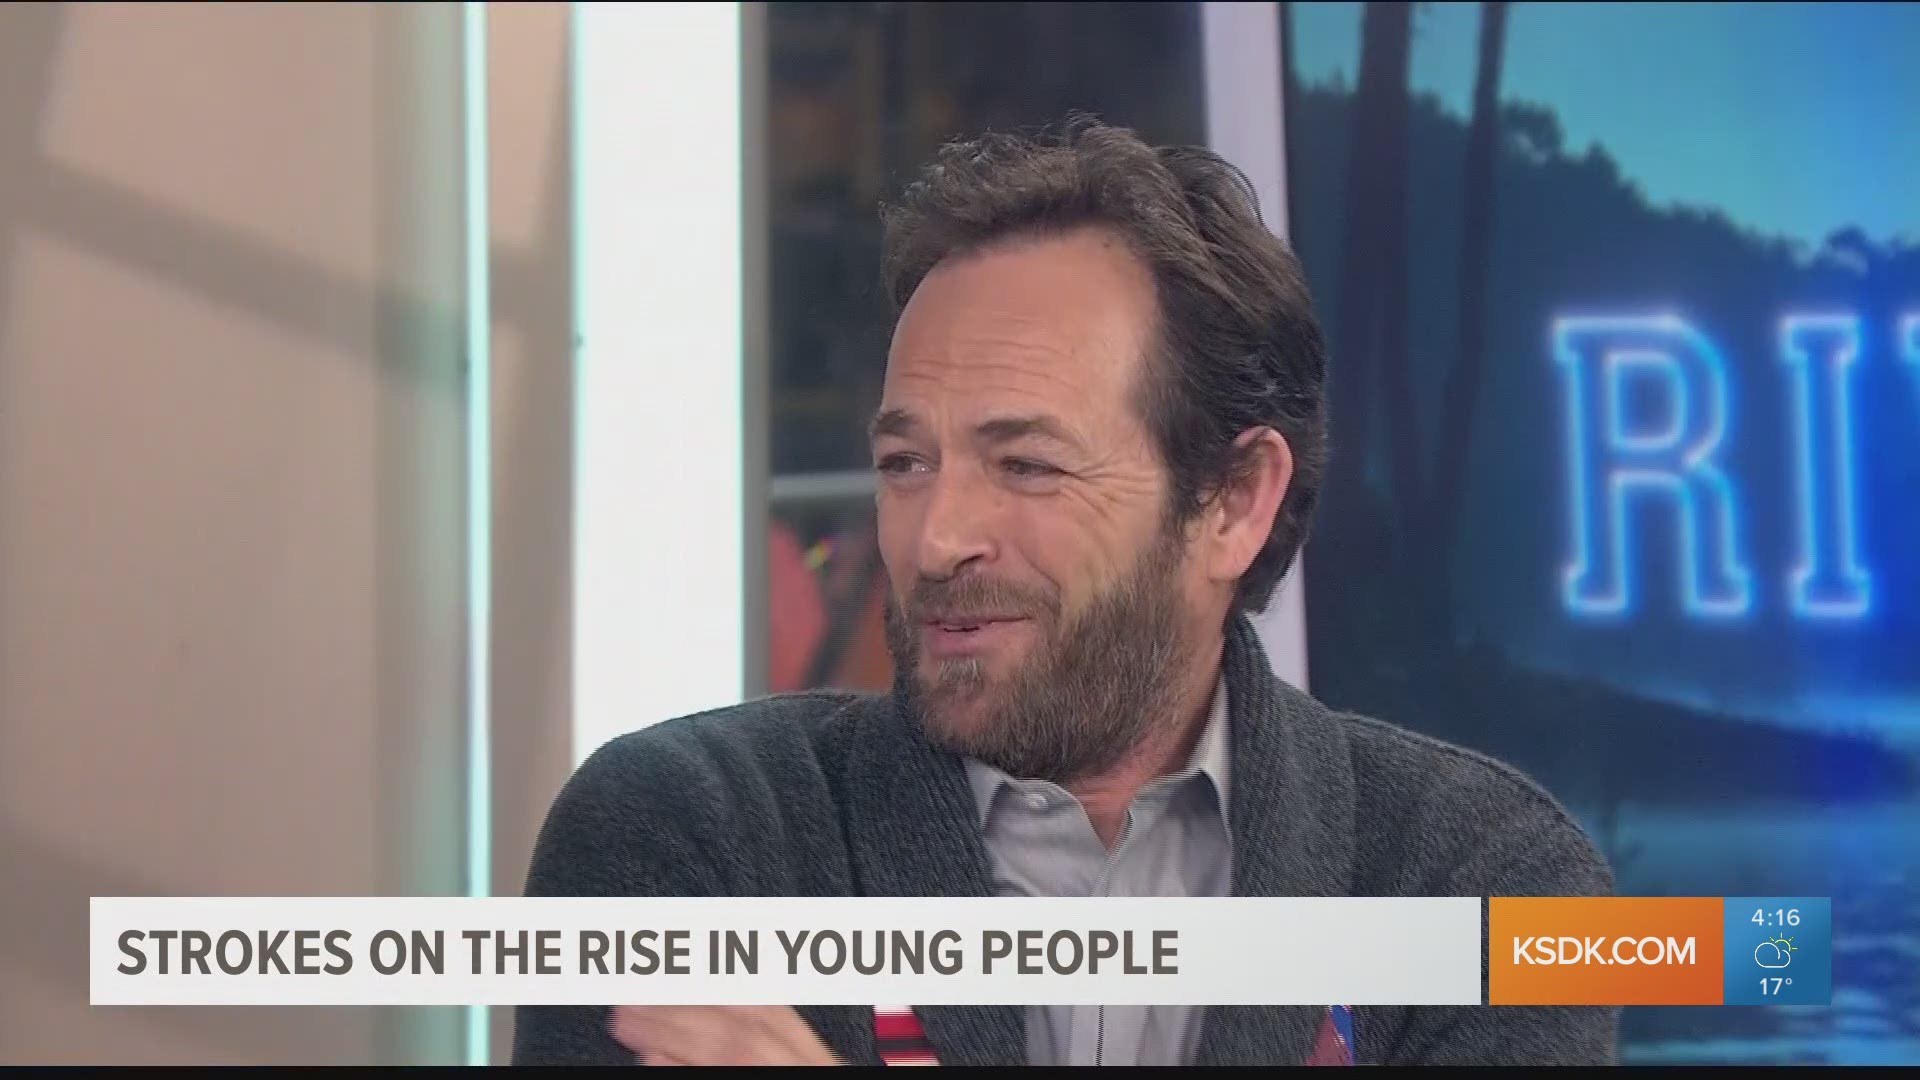 Death of actor Luke Perry from a stroke at 52 shining light on rising trend of stroke in young people.